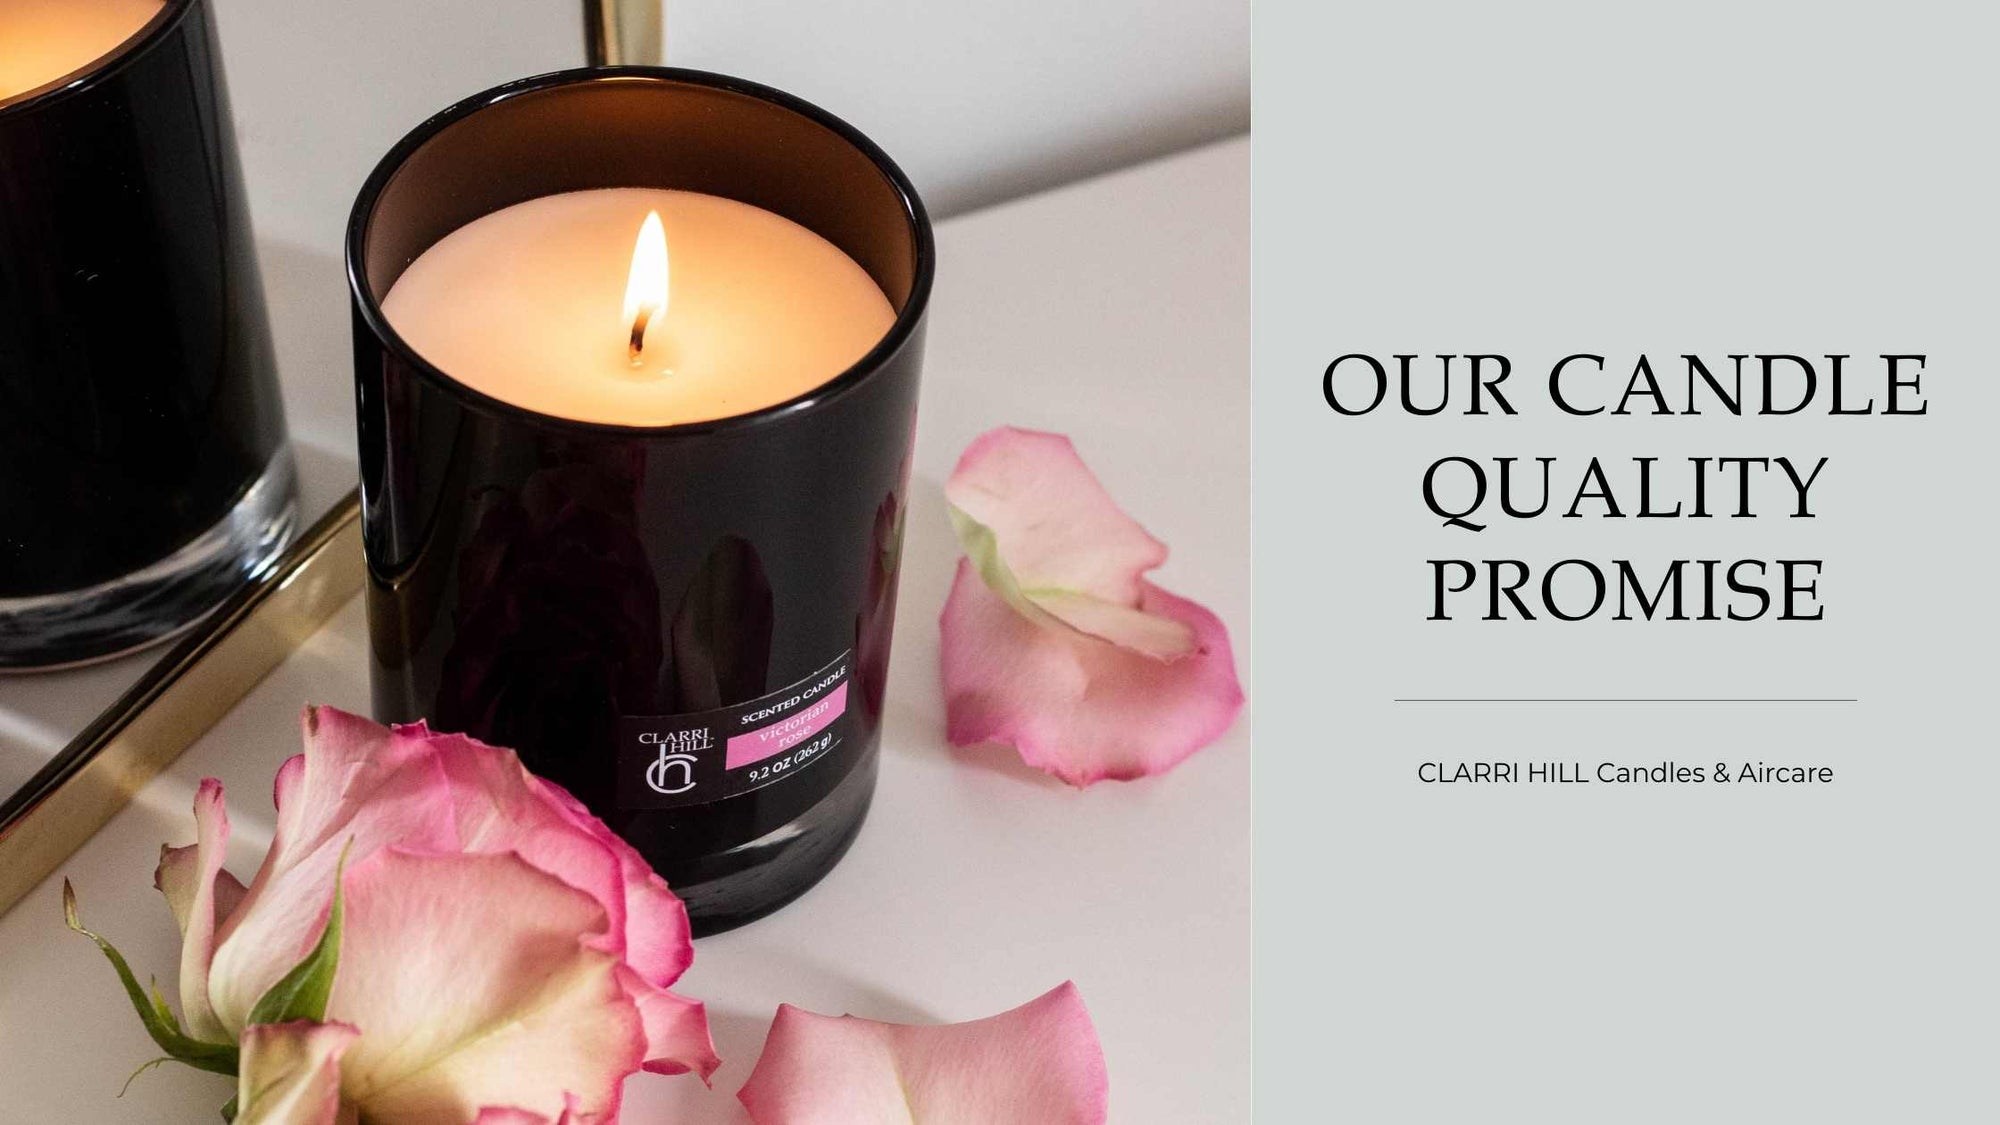 Our Candle Quality Promise